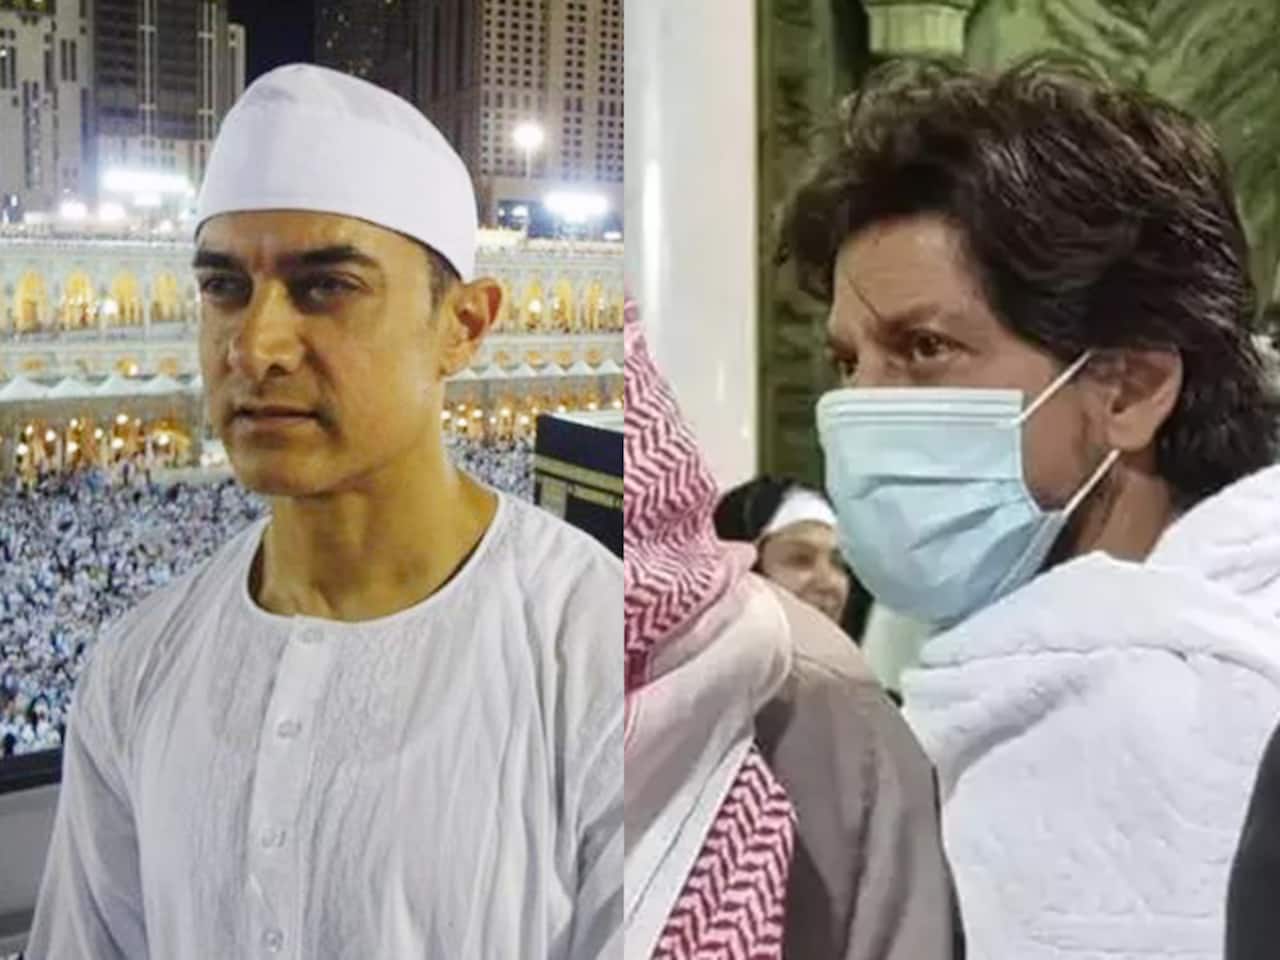 Celebrities who performed Umrah at Mecca